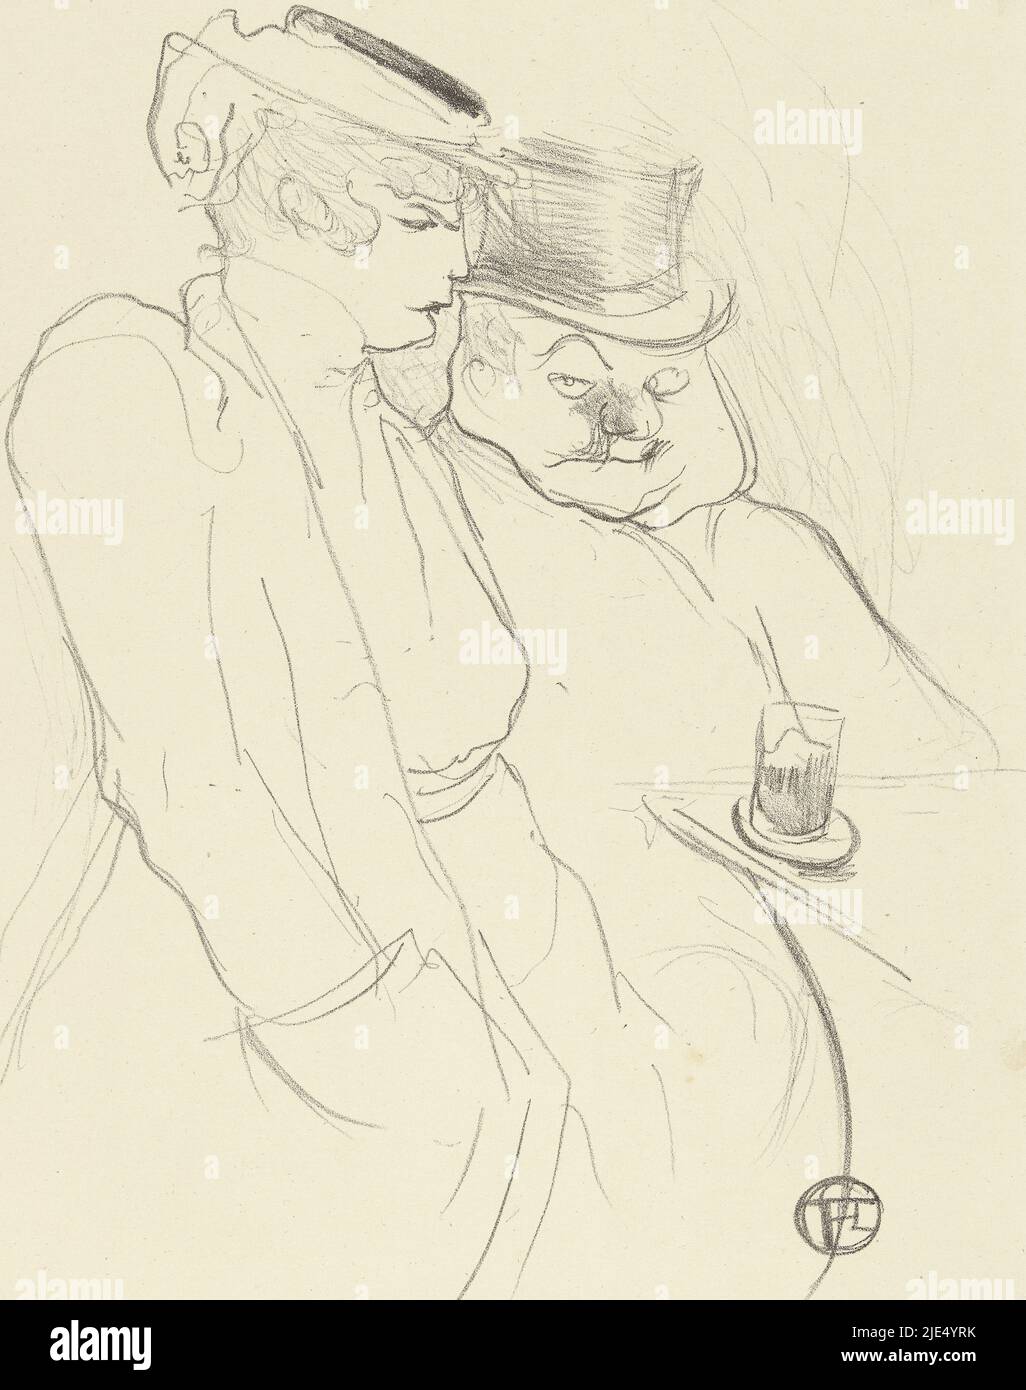 En quarante' (In their Forties) In their Forties En quarante, print maker: Henri de Toulouse-Lautrec, (mentioned on object), printer: Edward Ancourt, 26-Nov-1893 and/or 1893, paper, h 285 mm × w 235 mm Stock Photo